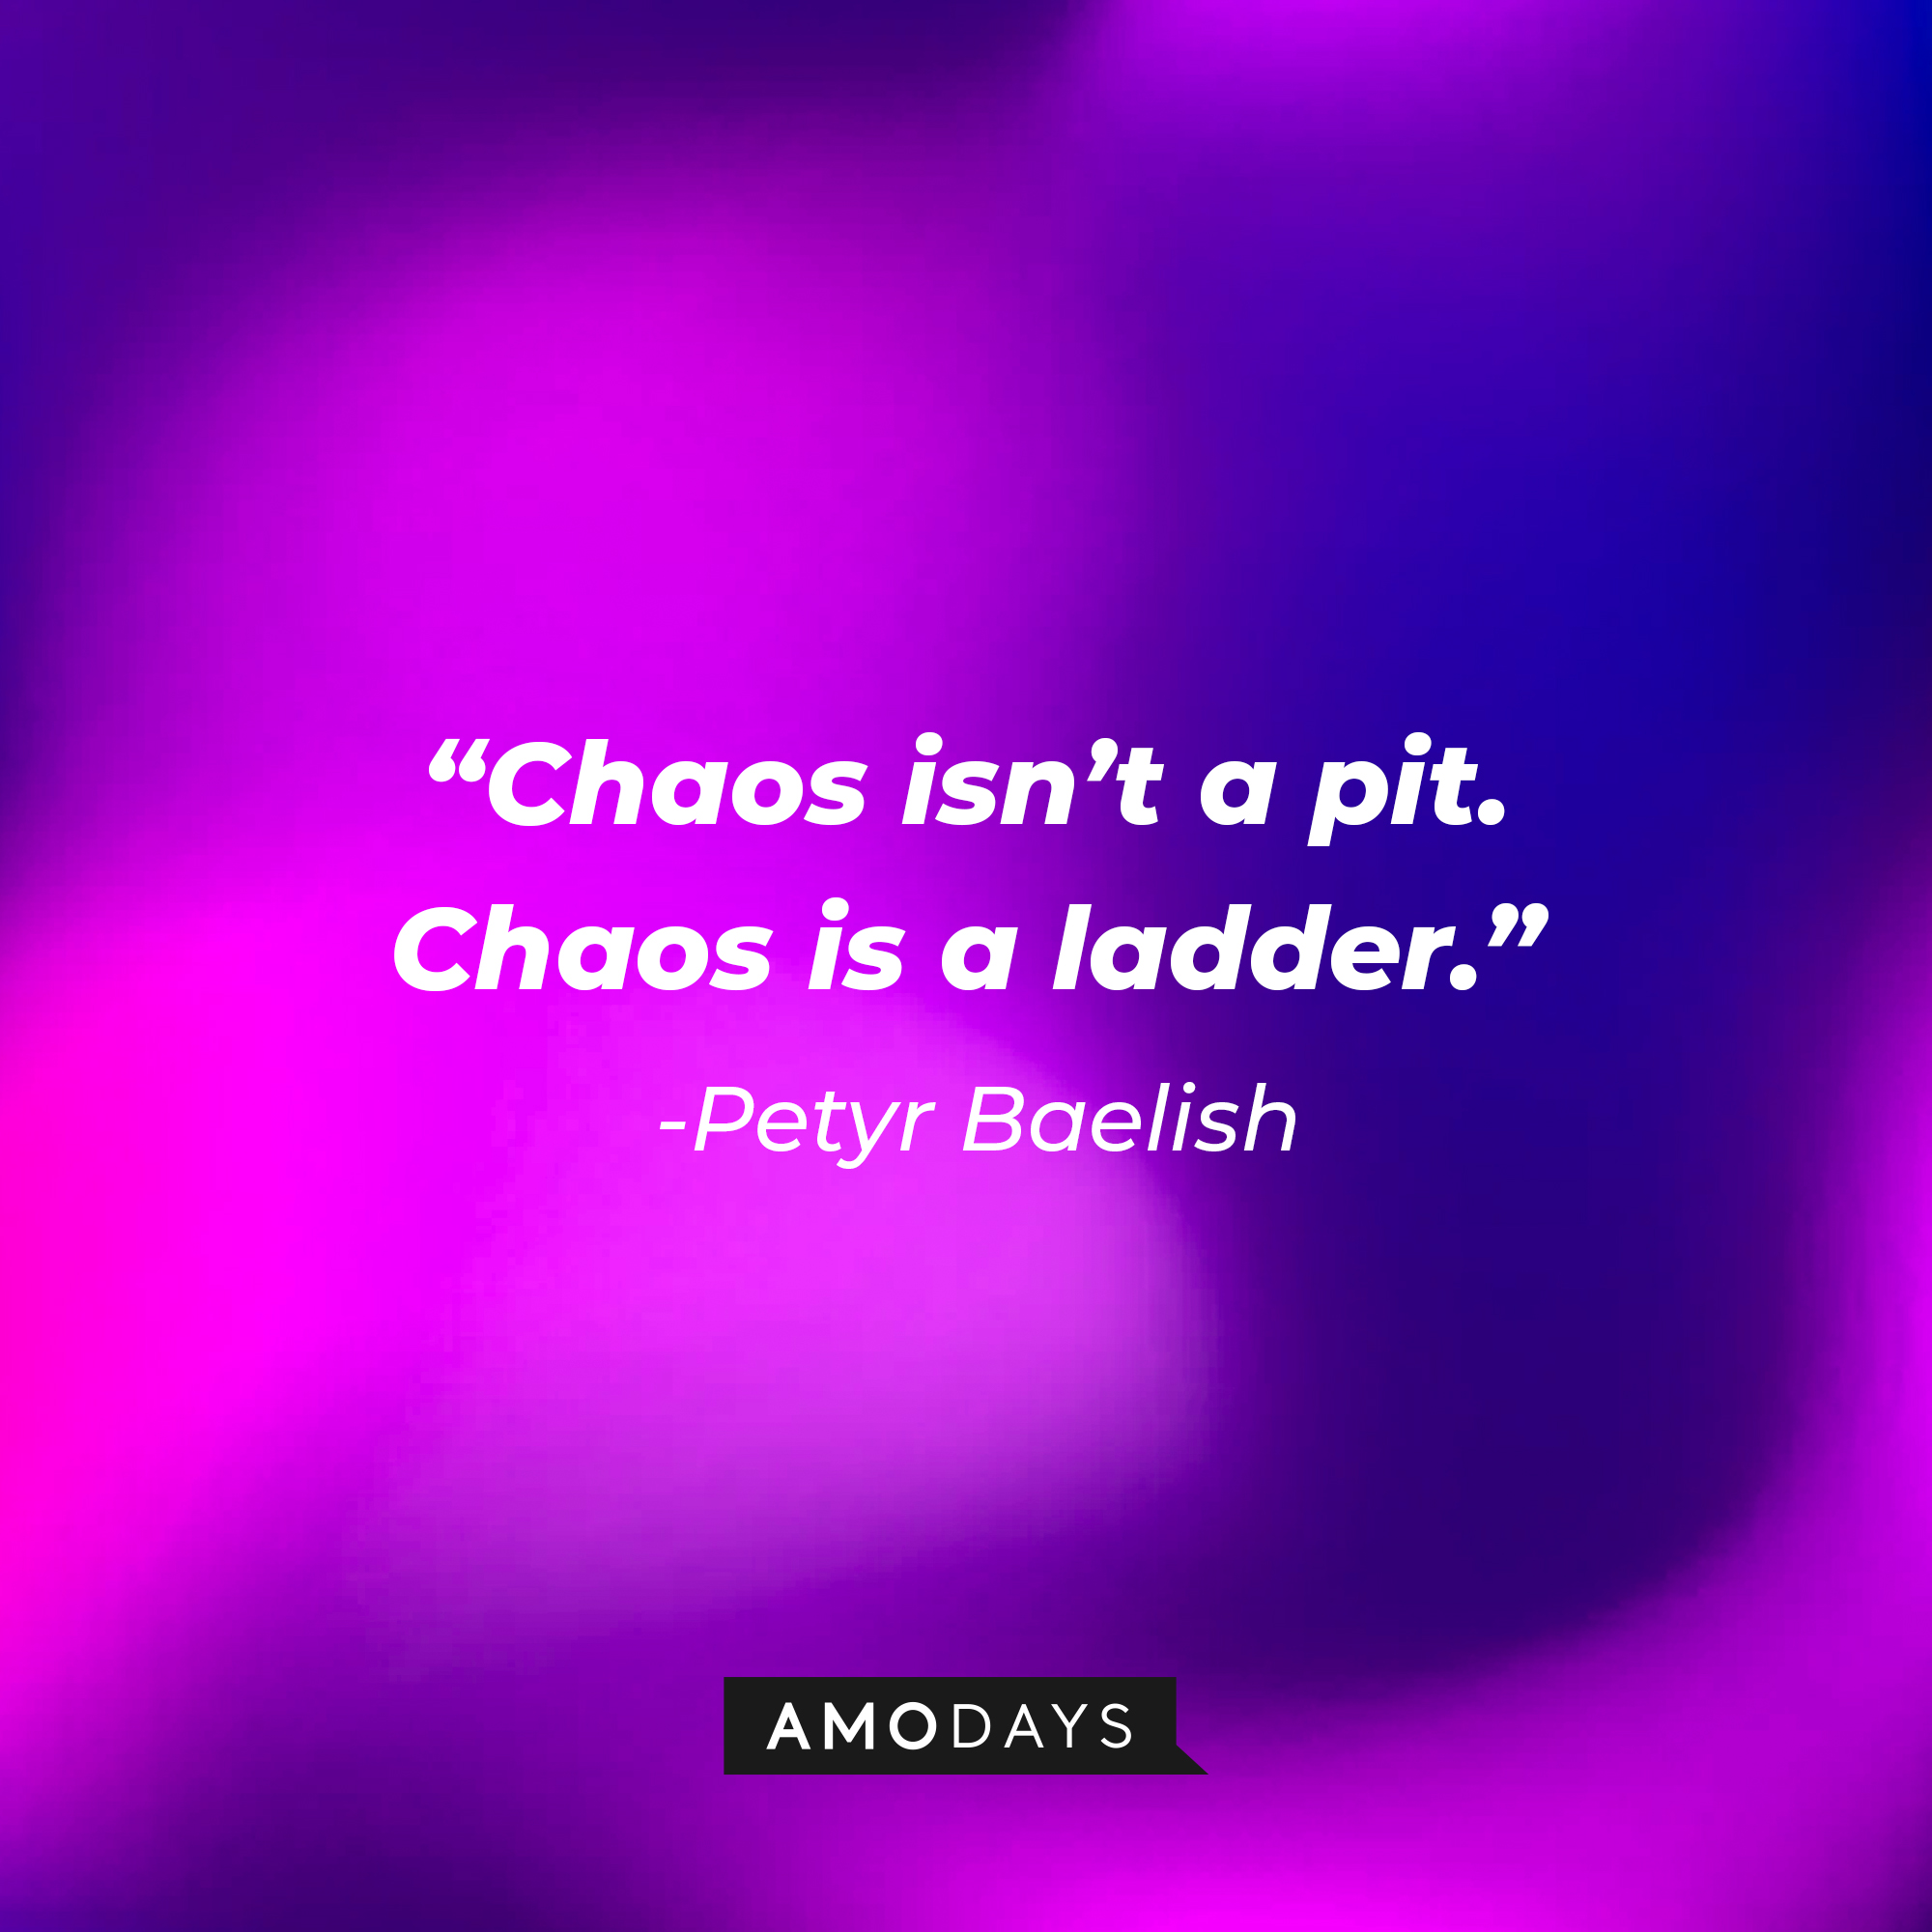 Petyr Baelish’s quote: “Chaos isn’t a pit. Chaos is a ladder.” | Source: AmoDays